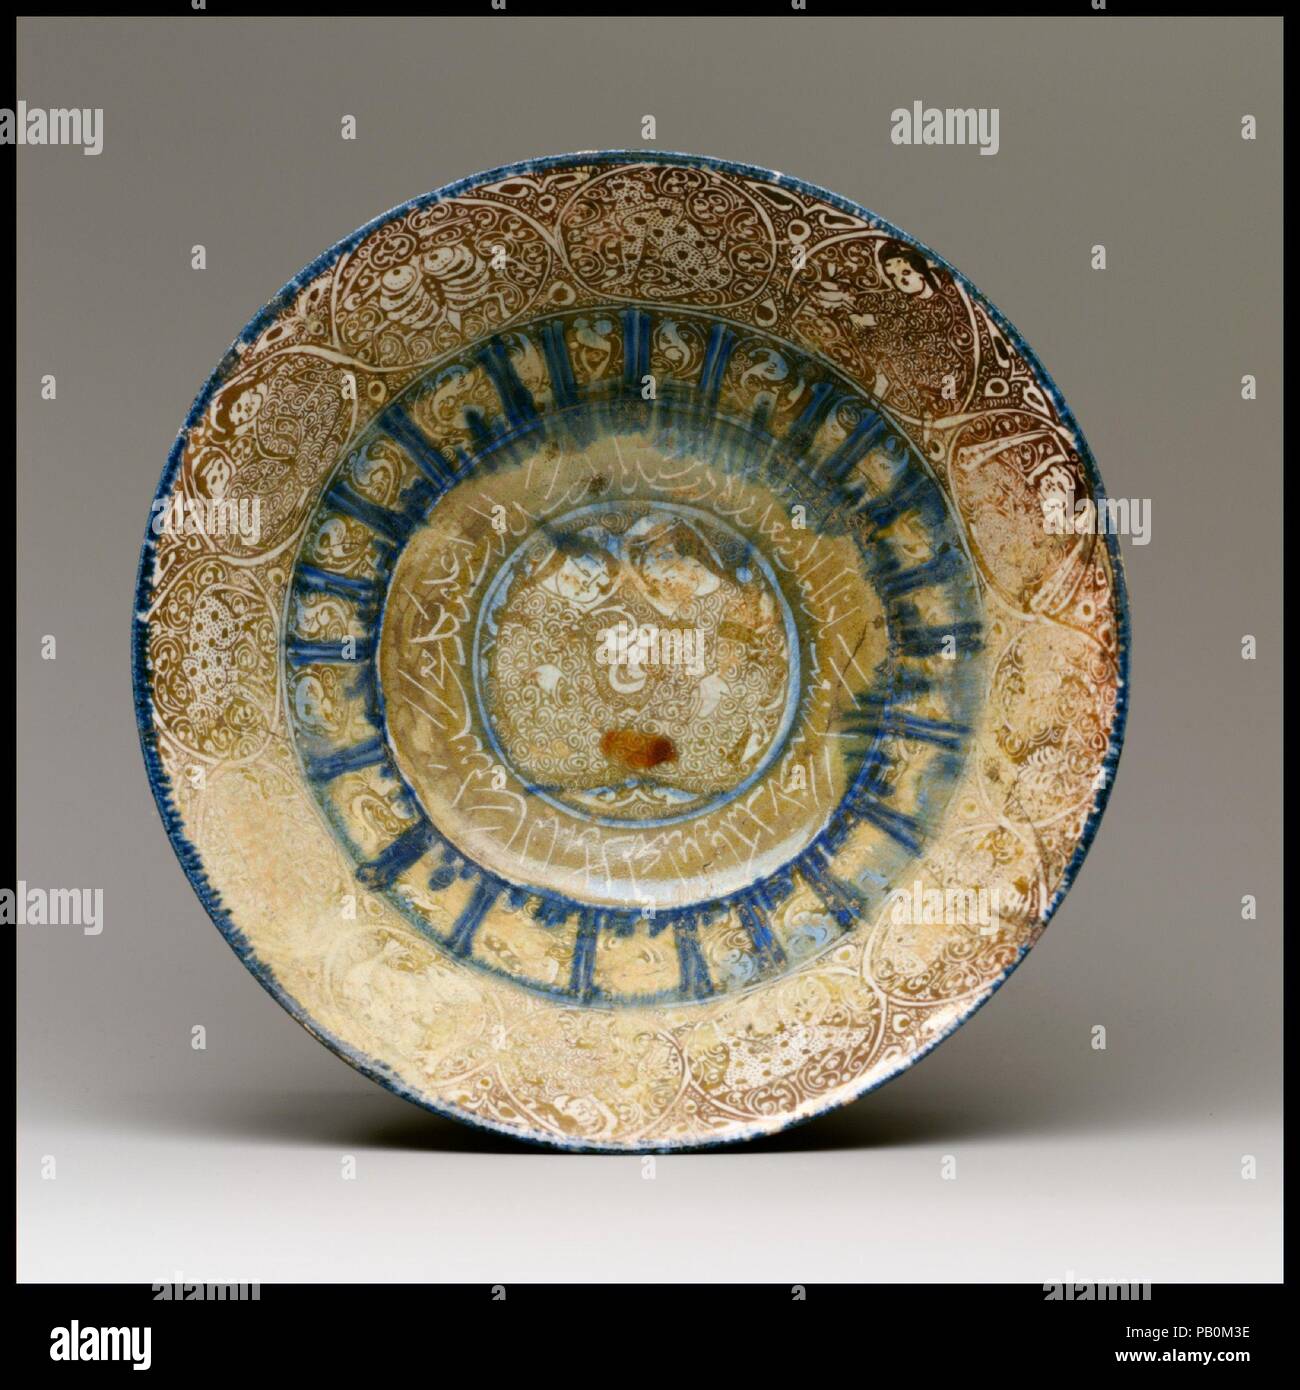 Bowl. Dimensions: Ht. 3 3/4 in. (9.5 cm)  Lip diameter: 8 1/16 in. (20.5 cm). Date: 13th century.  This bowl combines the most distinctive features of lusterware produced in Kashan: moon-faced figures; poetry in <i>naskhi</i> calligraphy; and a covering of spiral marks that fill the areas between the decorative motifs. In addition, the outermost decorative band includes medallions with all twelve signs of the Zodiac. Capricorn (<i>al-jady</i>, 'the kid'), is depicted as a small goat in profile. Like the other Zodiac signs that are represented as animals, such as Aries and Taurus, when shown wi Stock Photo